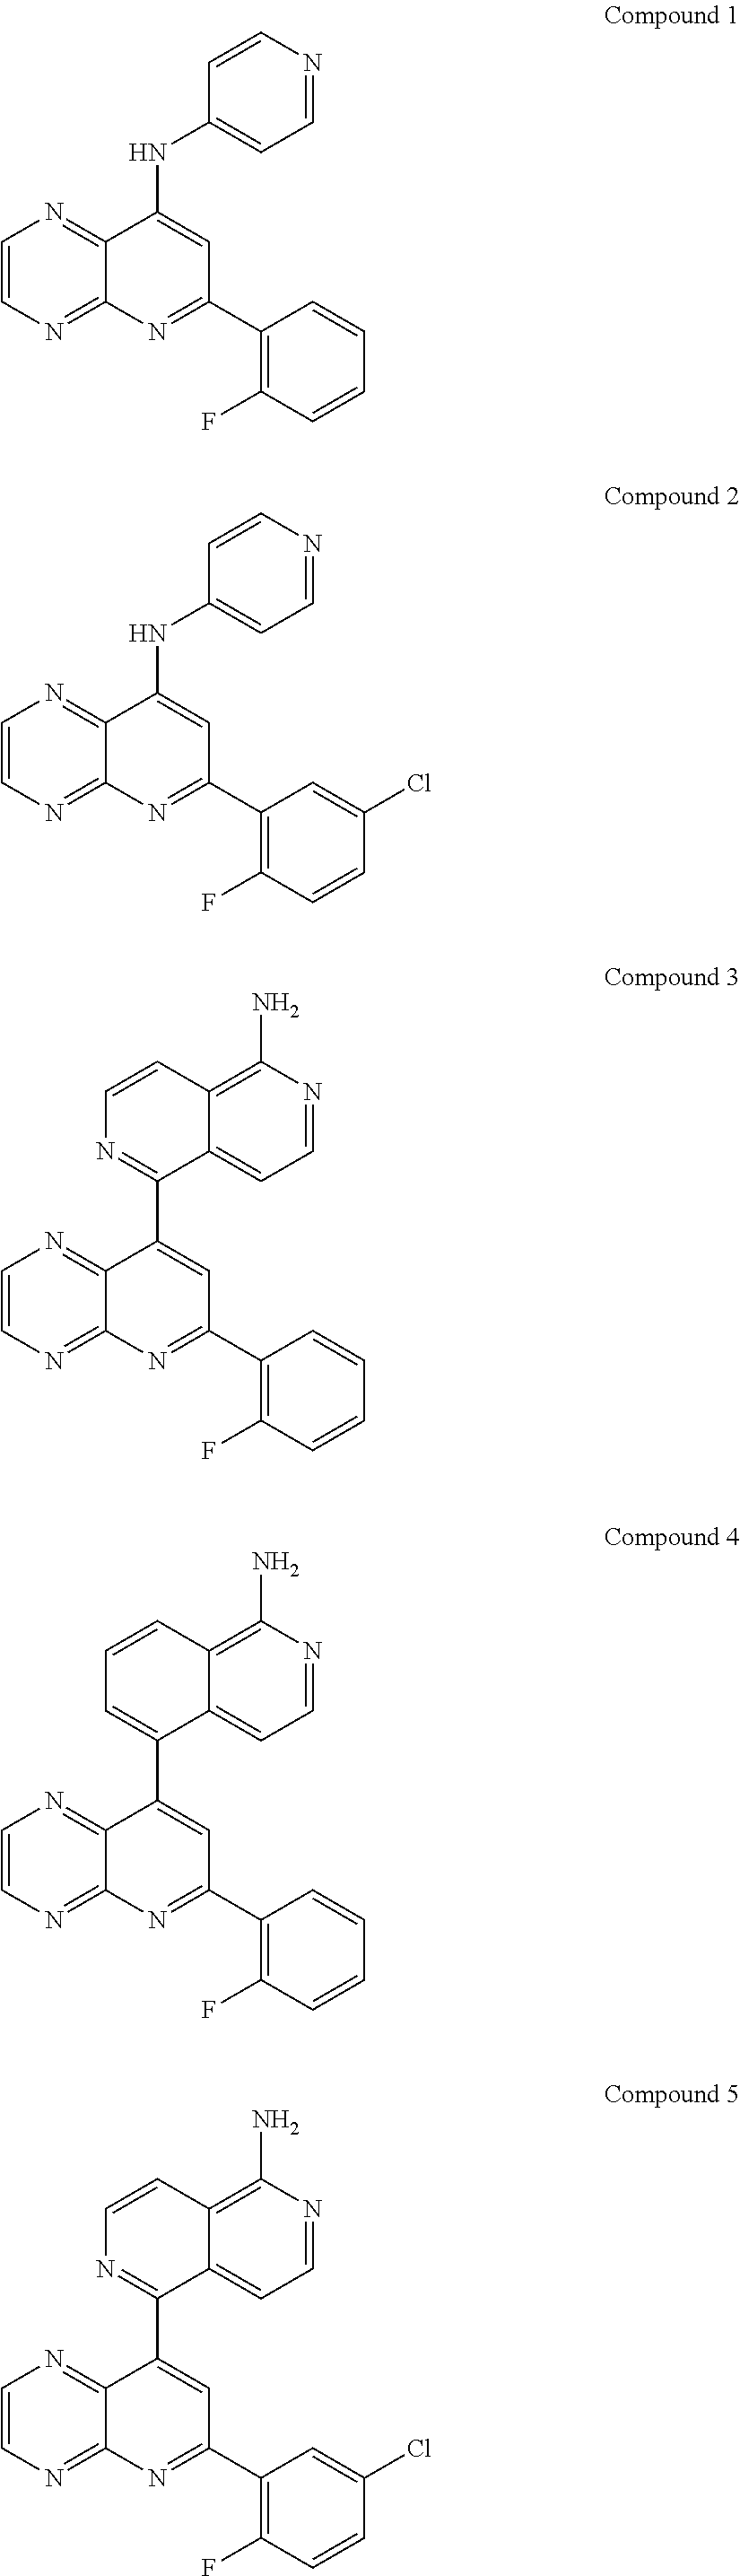 Pyrido [2, 3 - b] pyrazine derivatives and their therapeutical uses